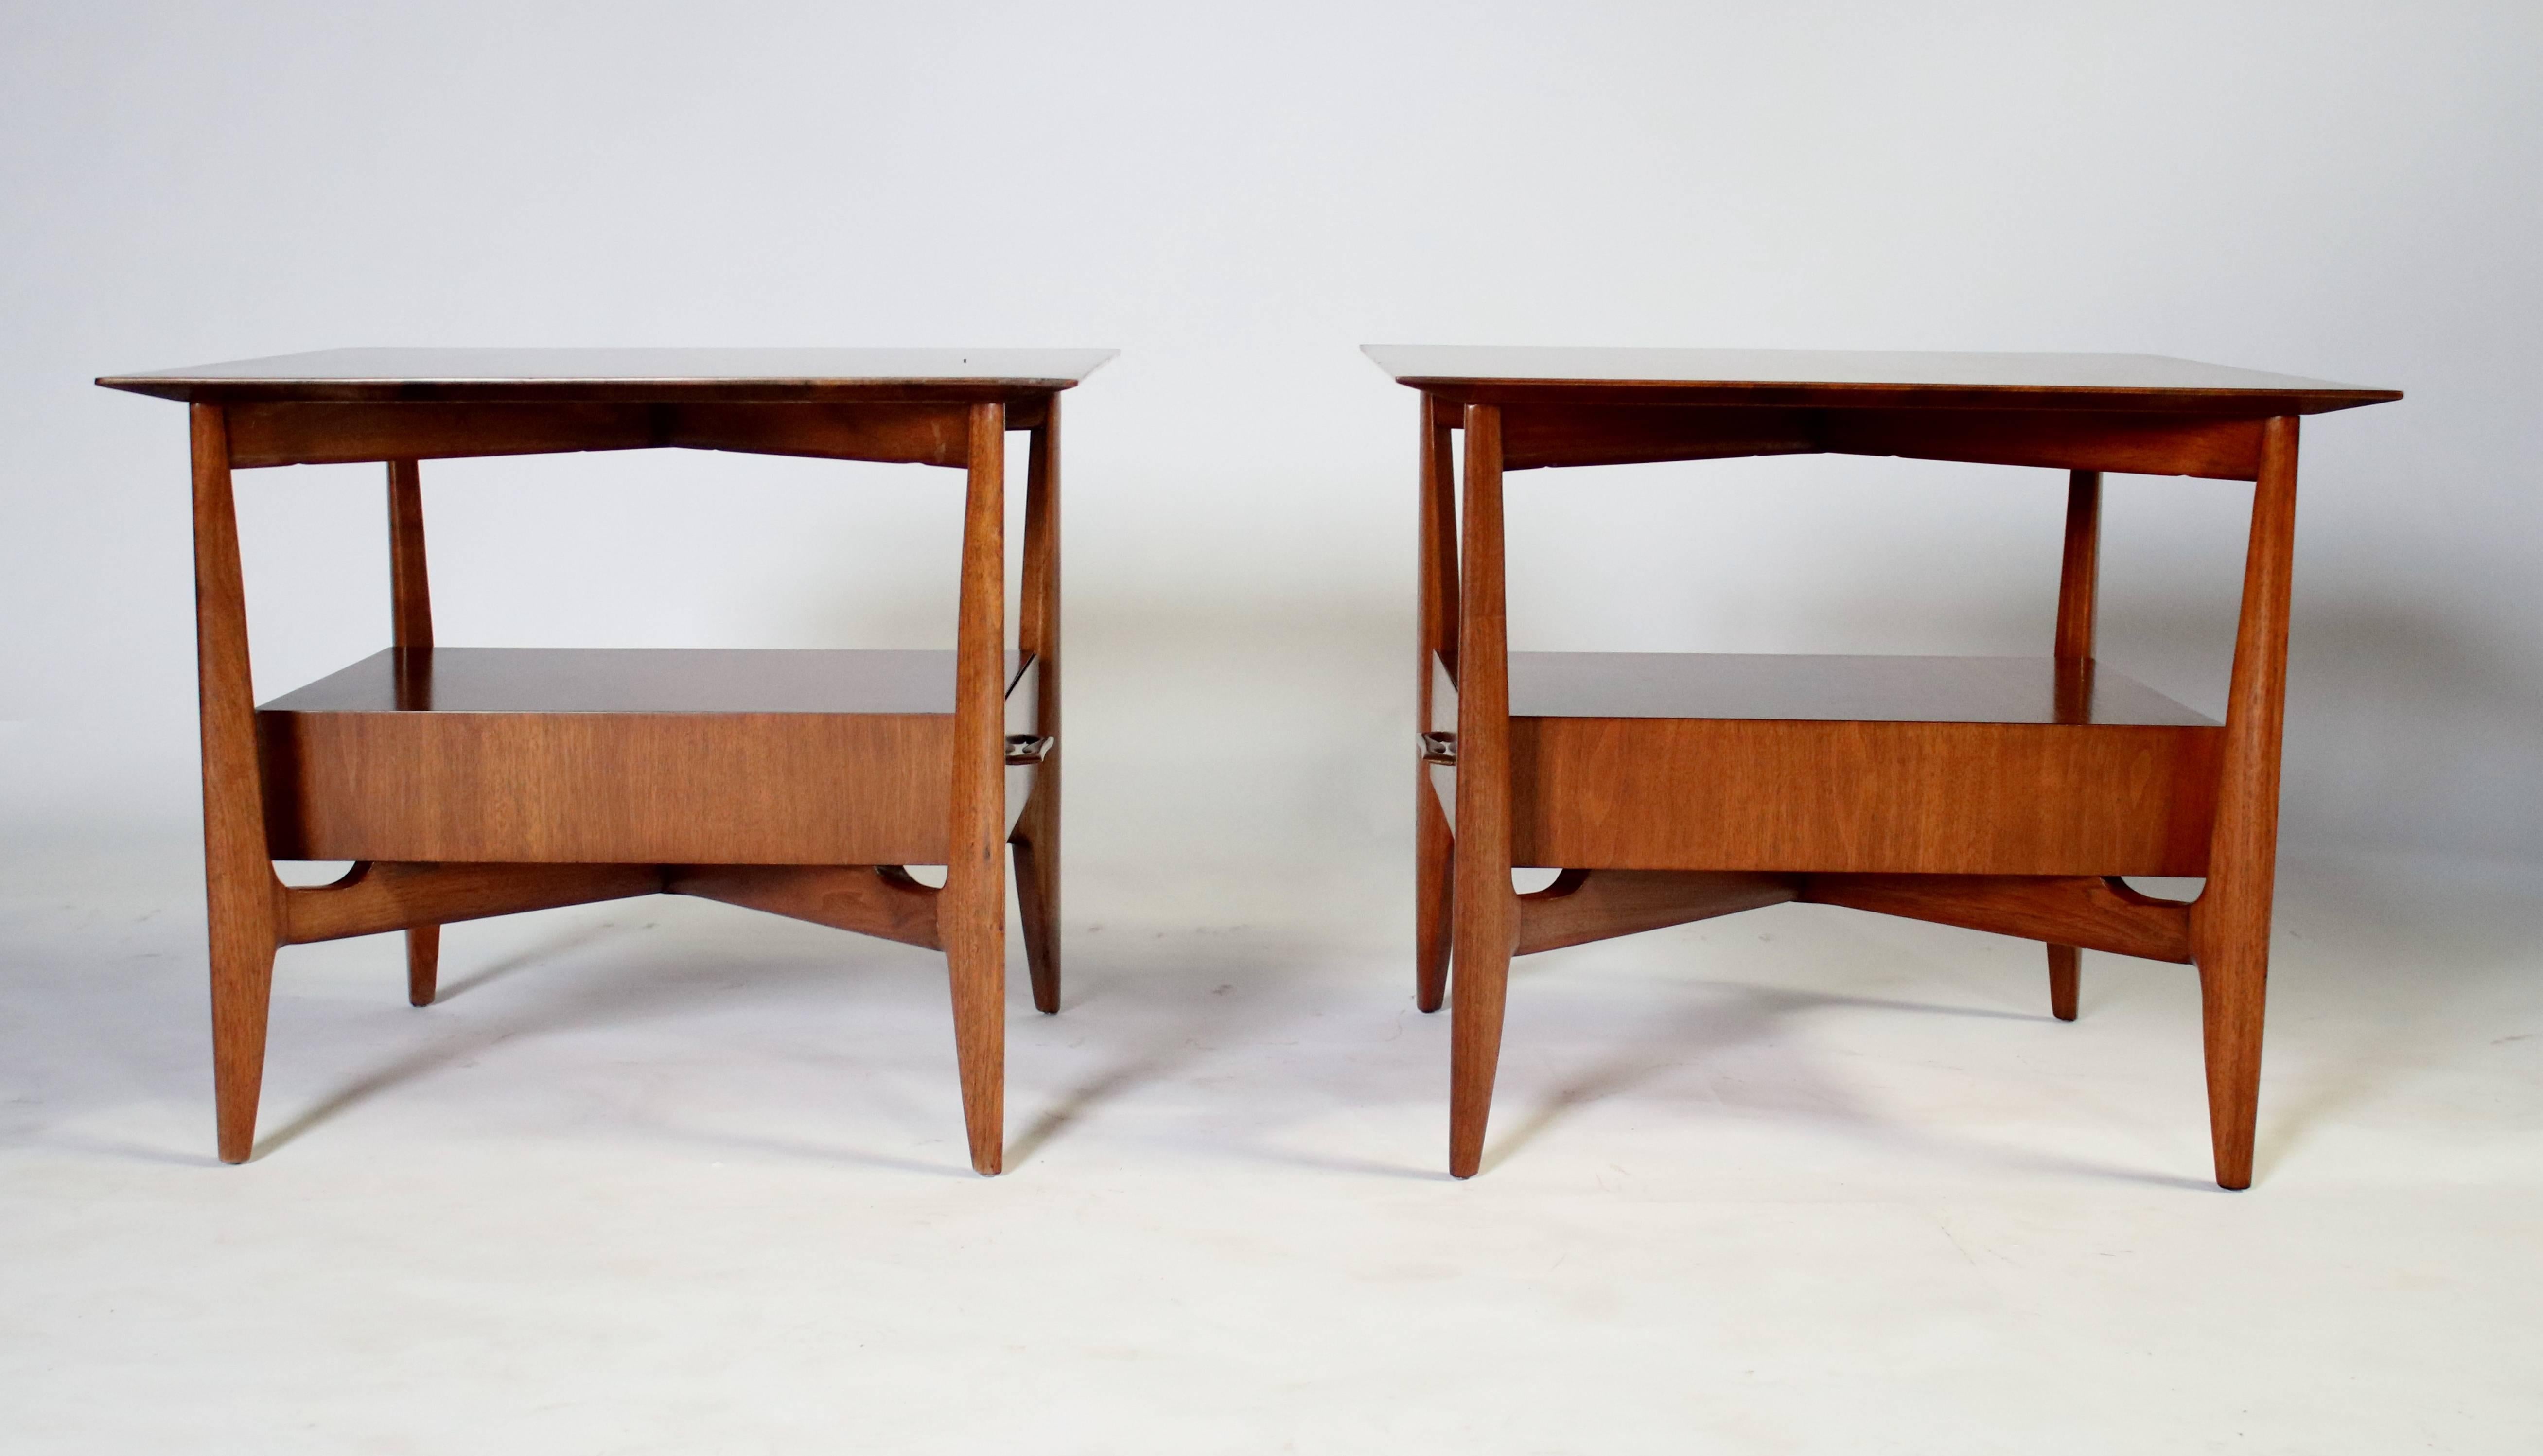 Pair of 1960s sculptural walnut end tables by John Stuart with a floating single drawer and original brass pulls.